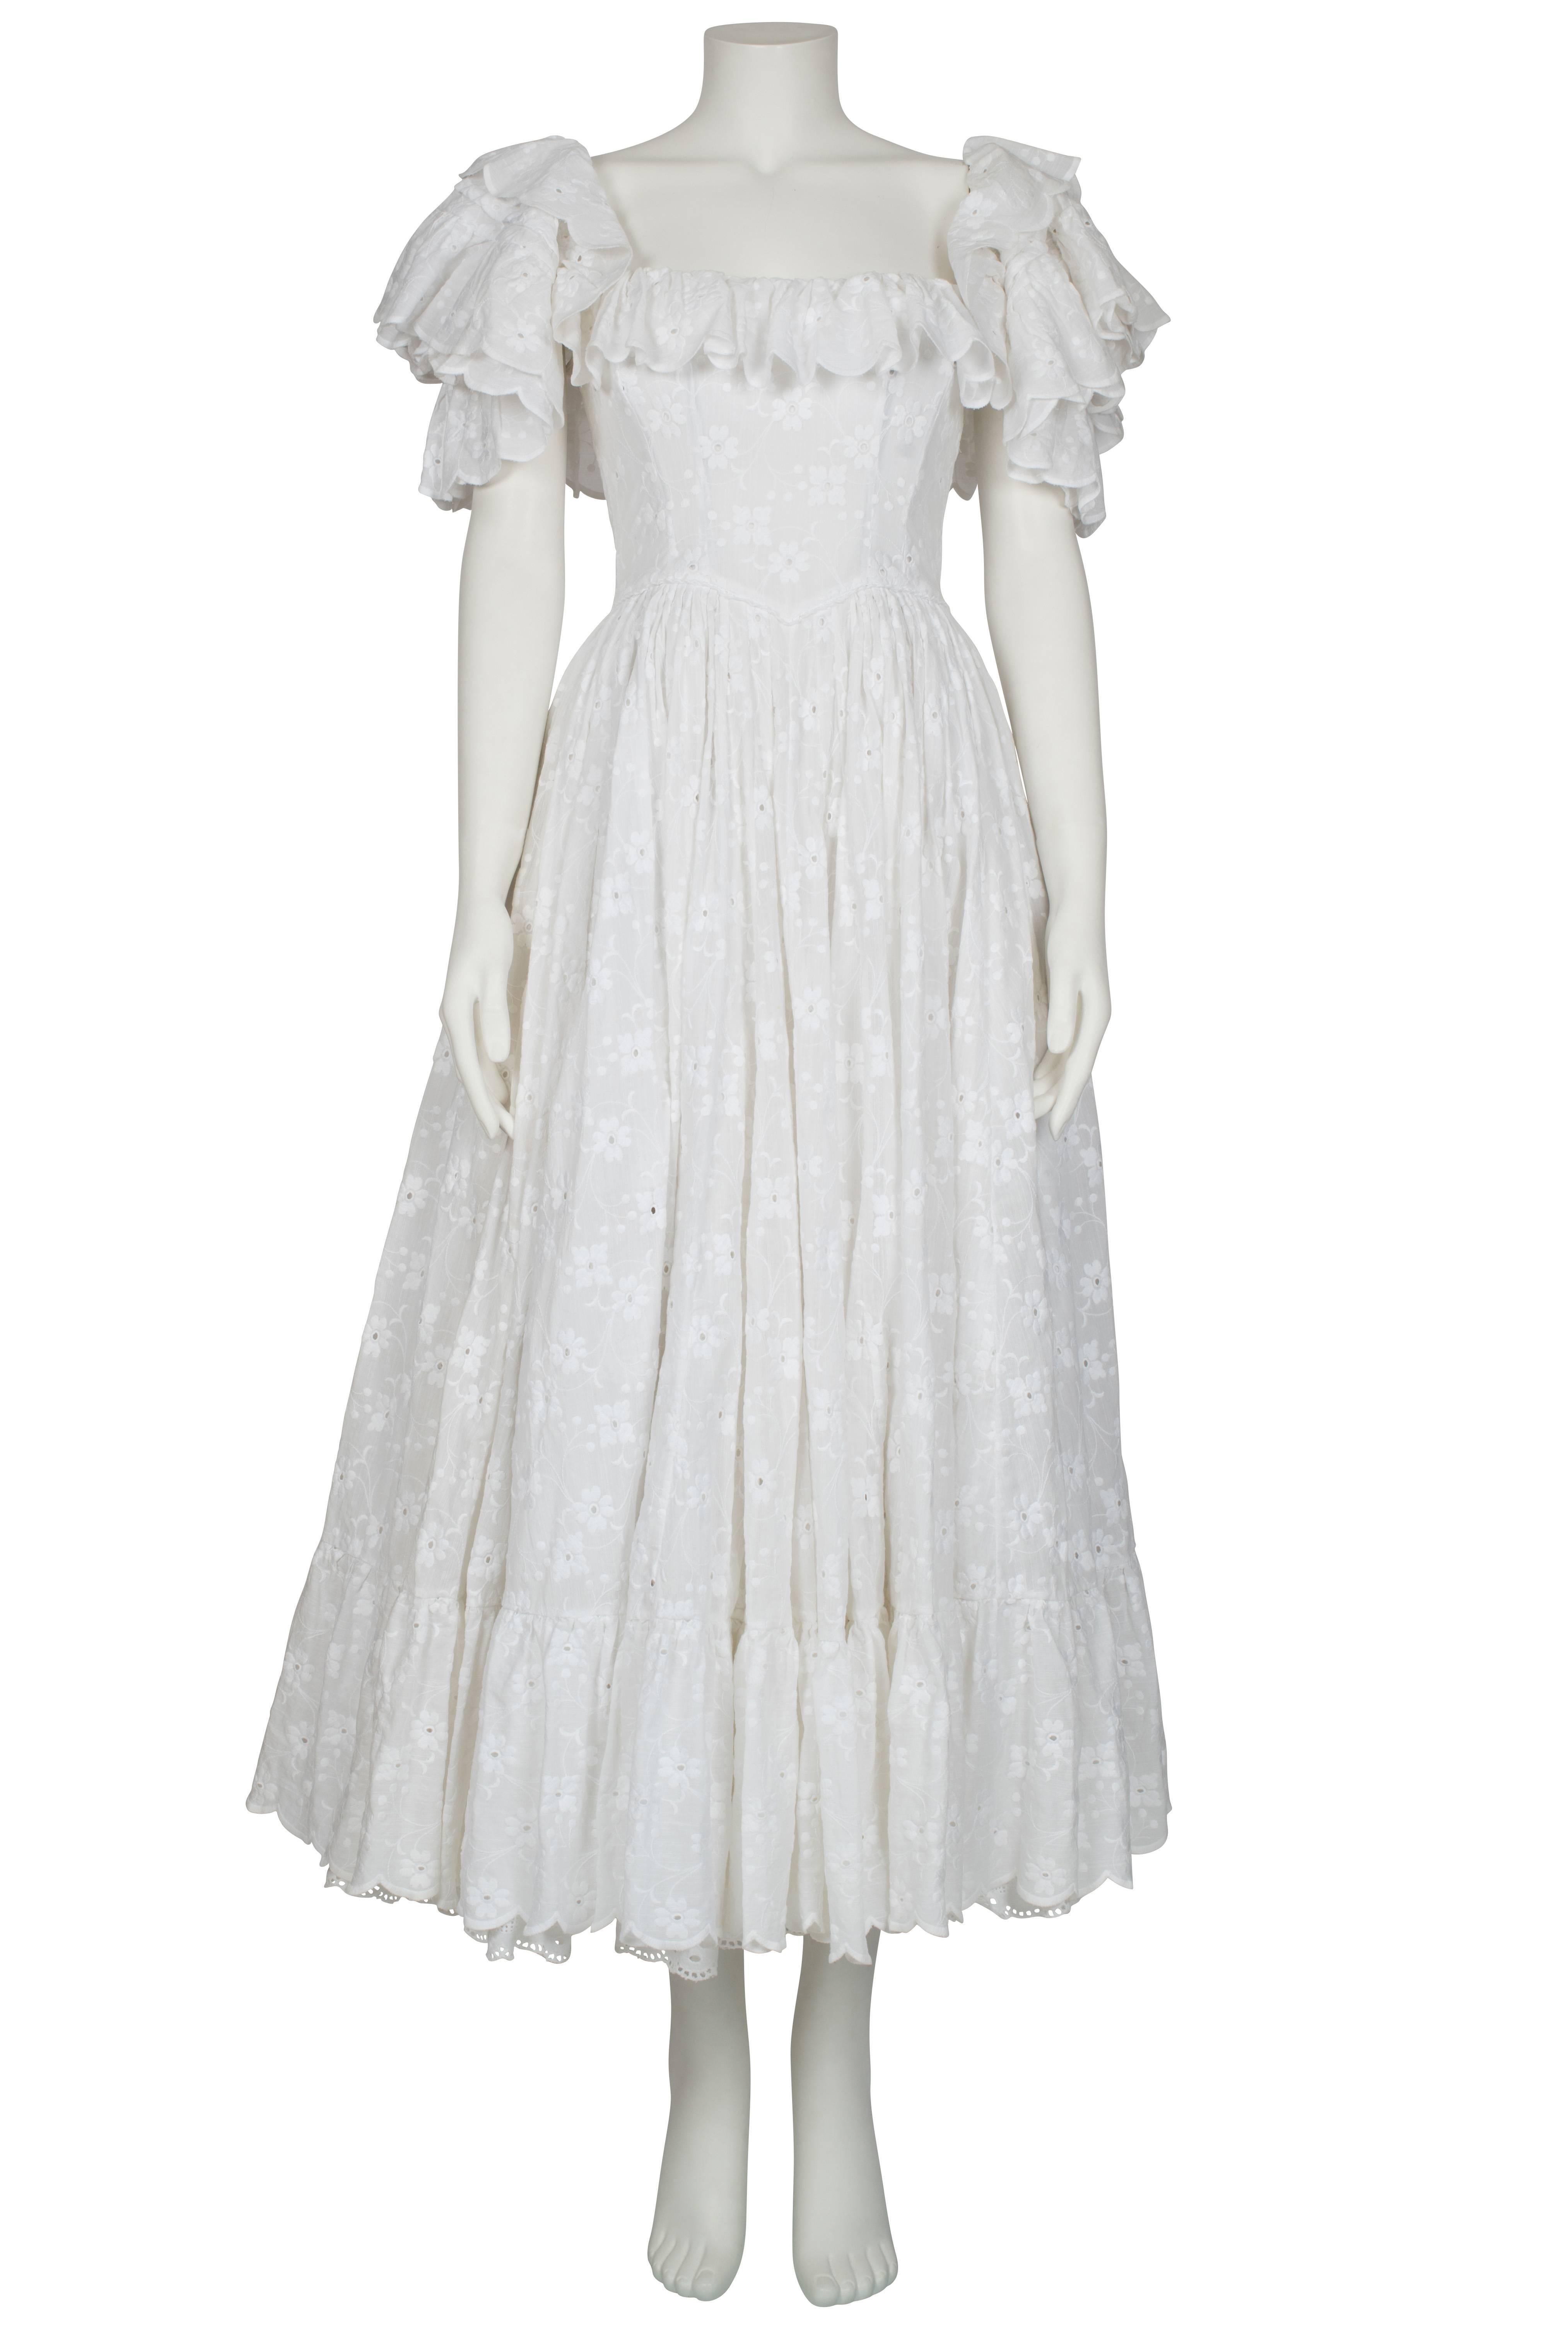 1976 Ossie Clark Broderie Anglaise Dress In Excellent Condition In London, GB